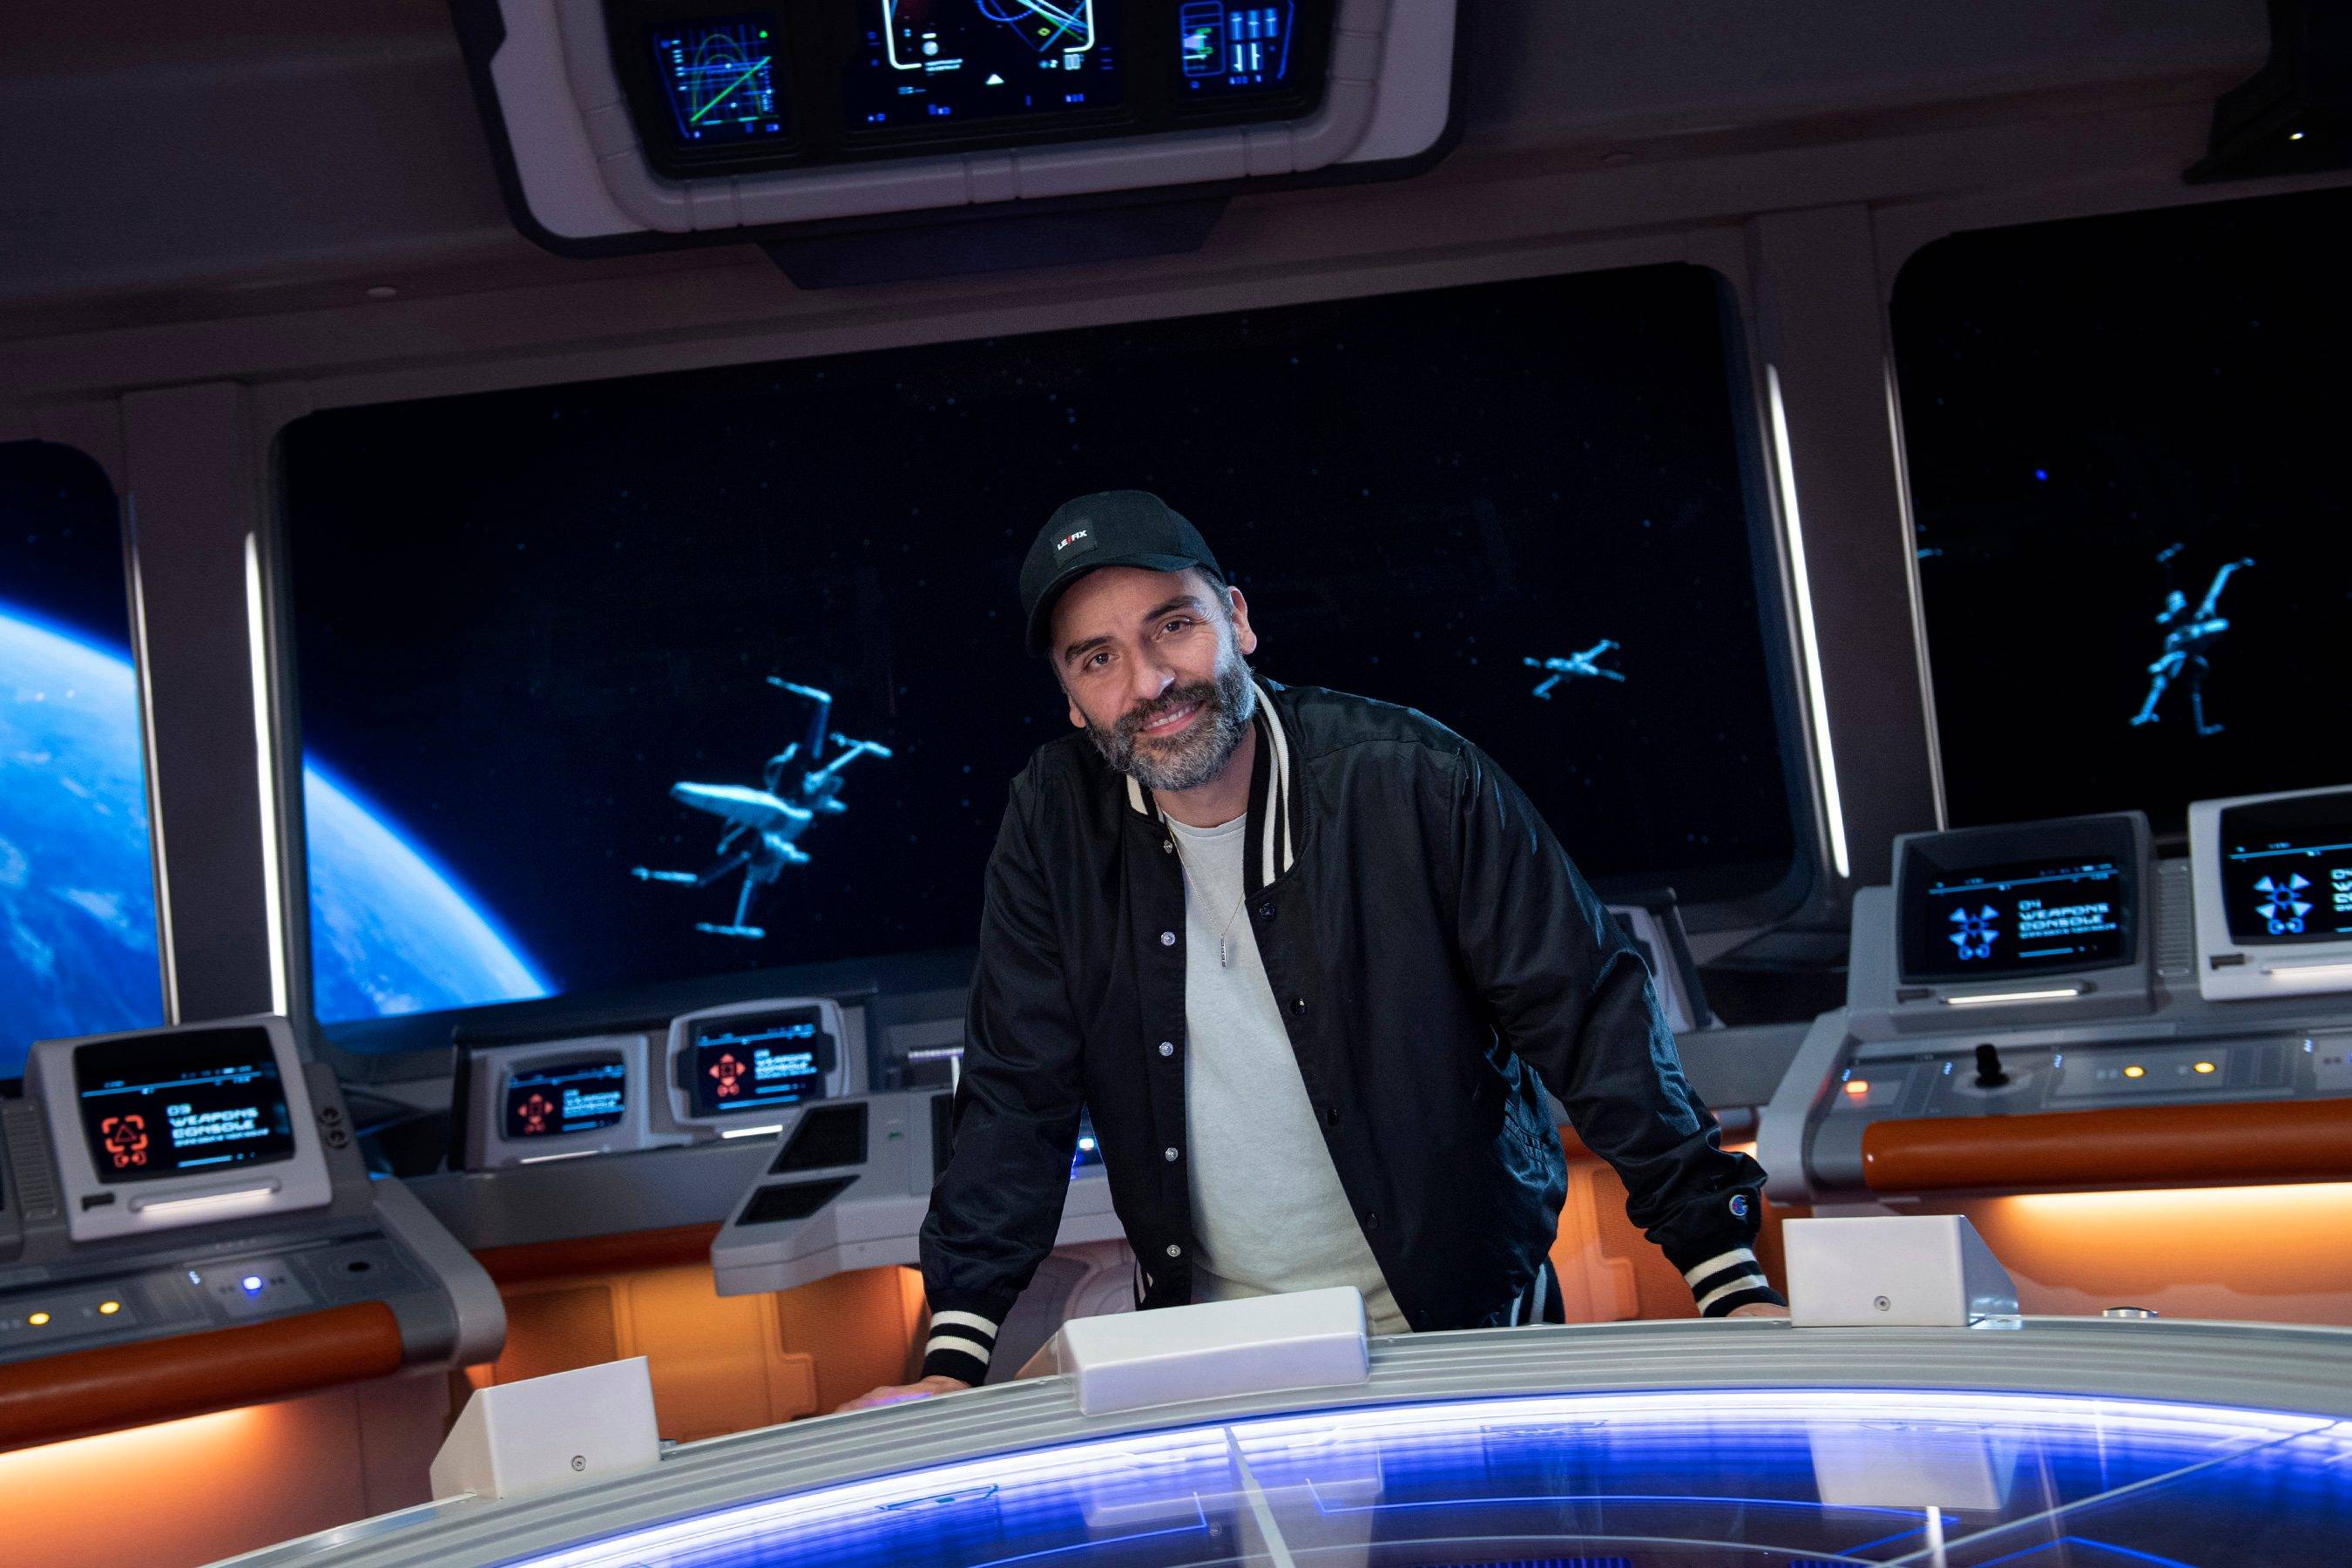 Oscar Isaac who played Poe Dameron in the latest Star Wars film trilogy visits Star Wars Galactic Starcruiser at Walt Disney World